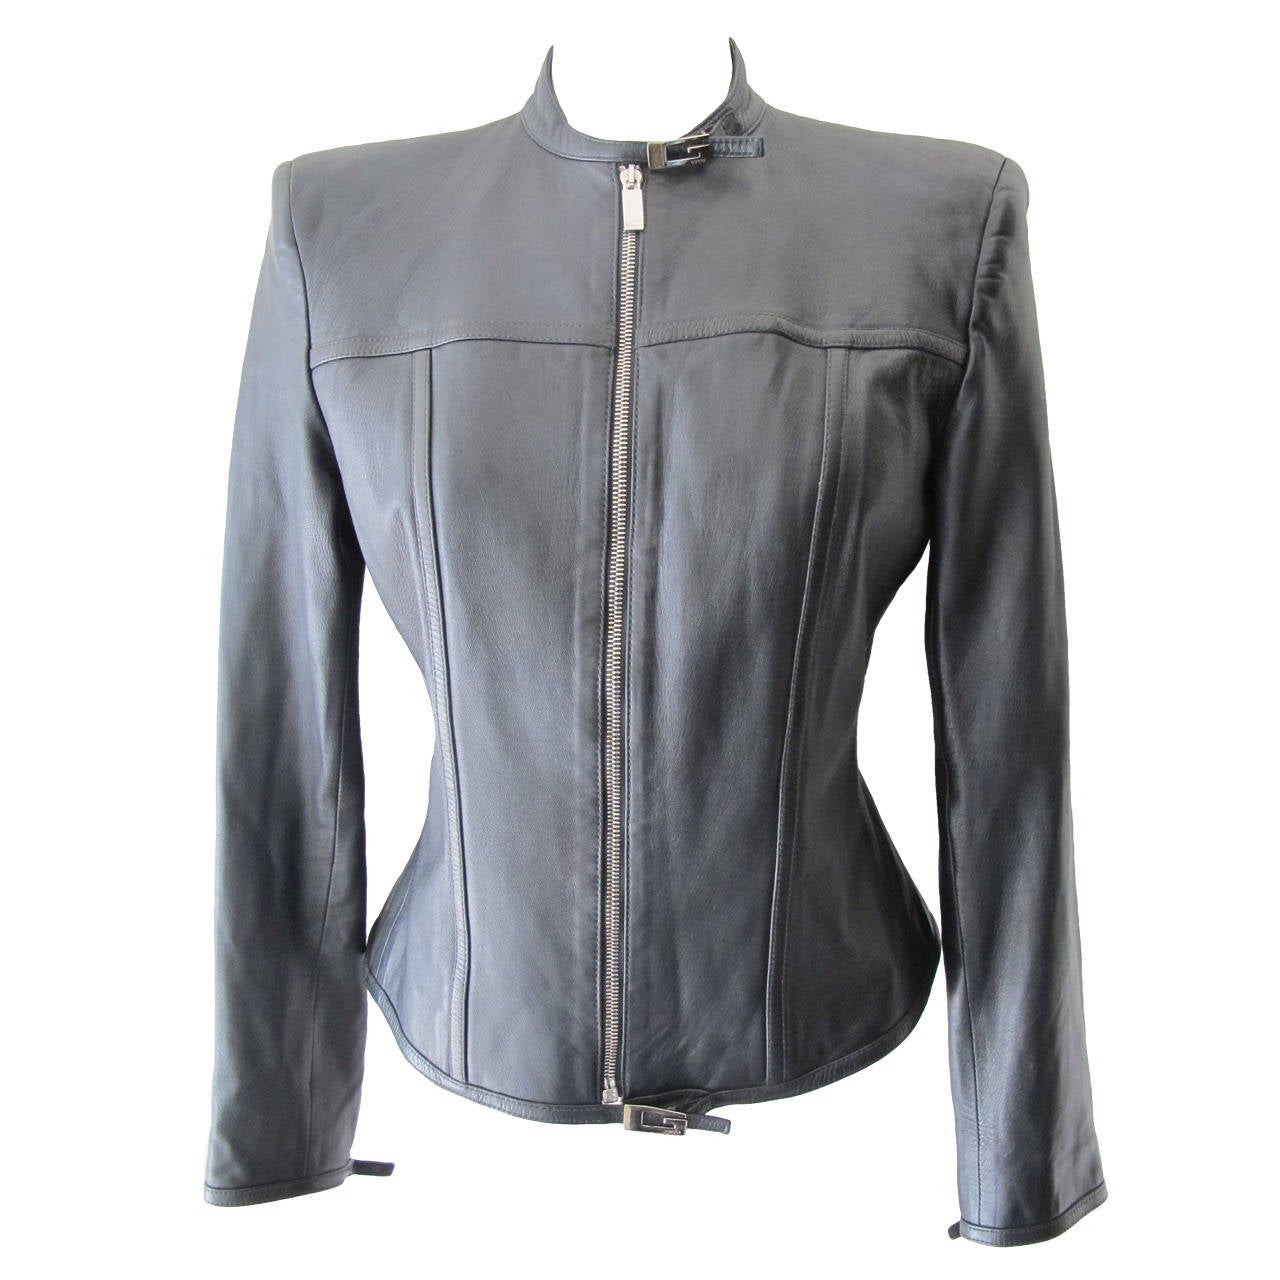 Iconic Tom Ford Black Leather Jacket for Gucci For Sale